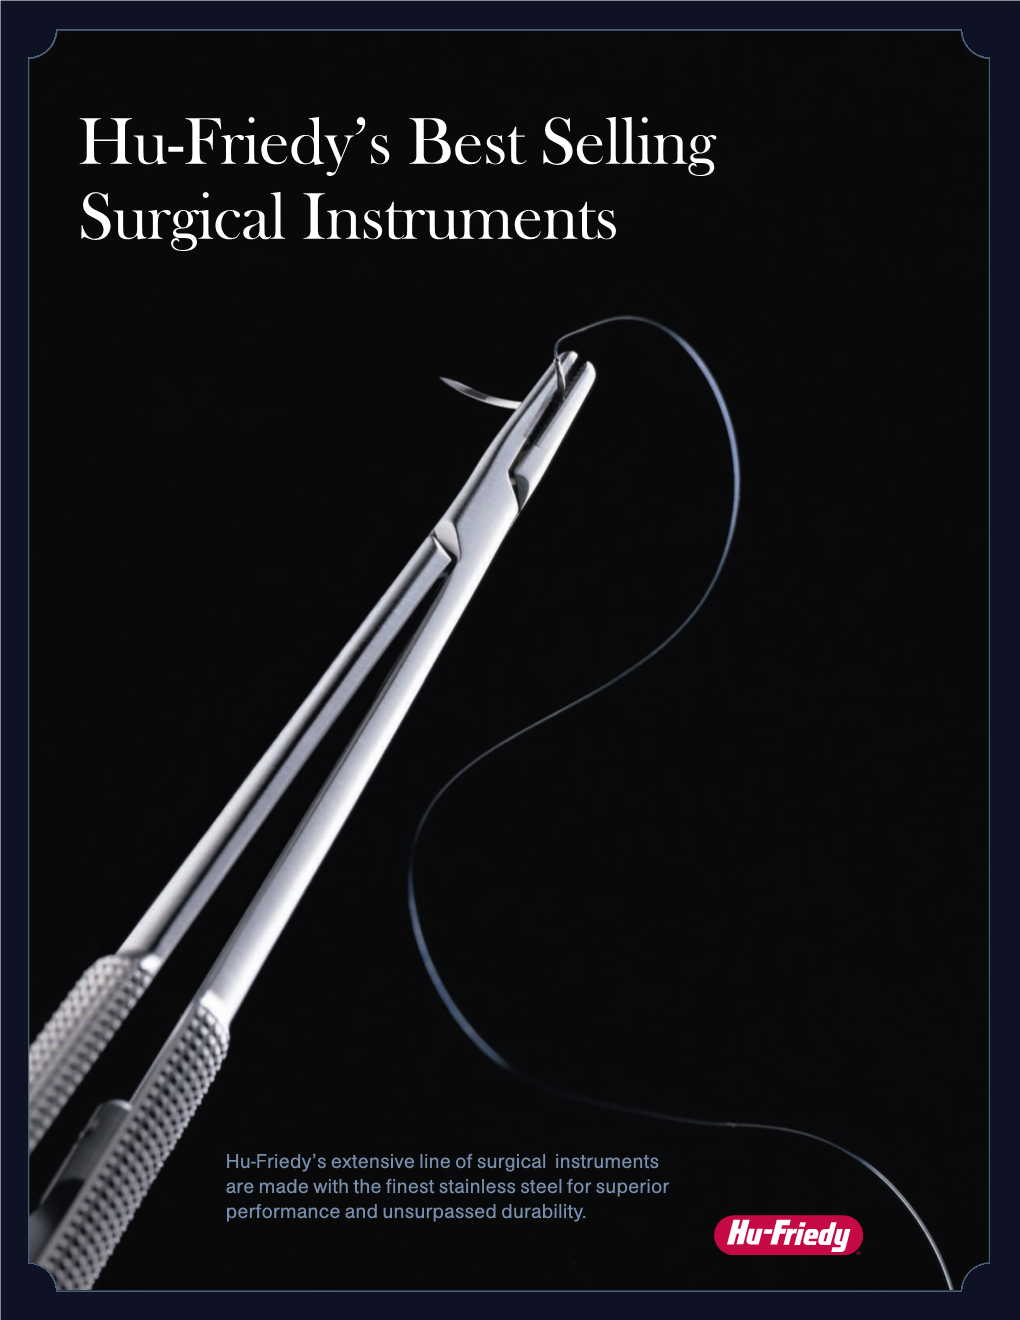 Hu-Friedy's Best Selling Surgical Instruments